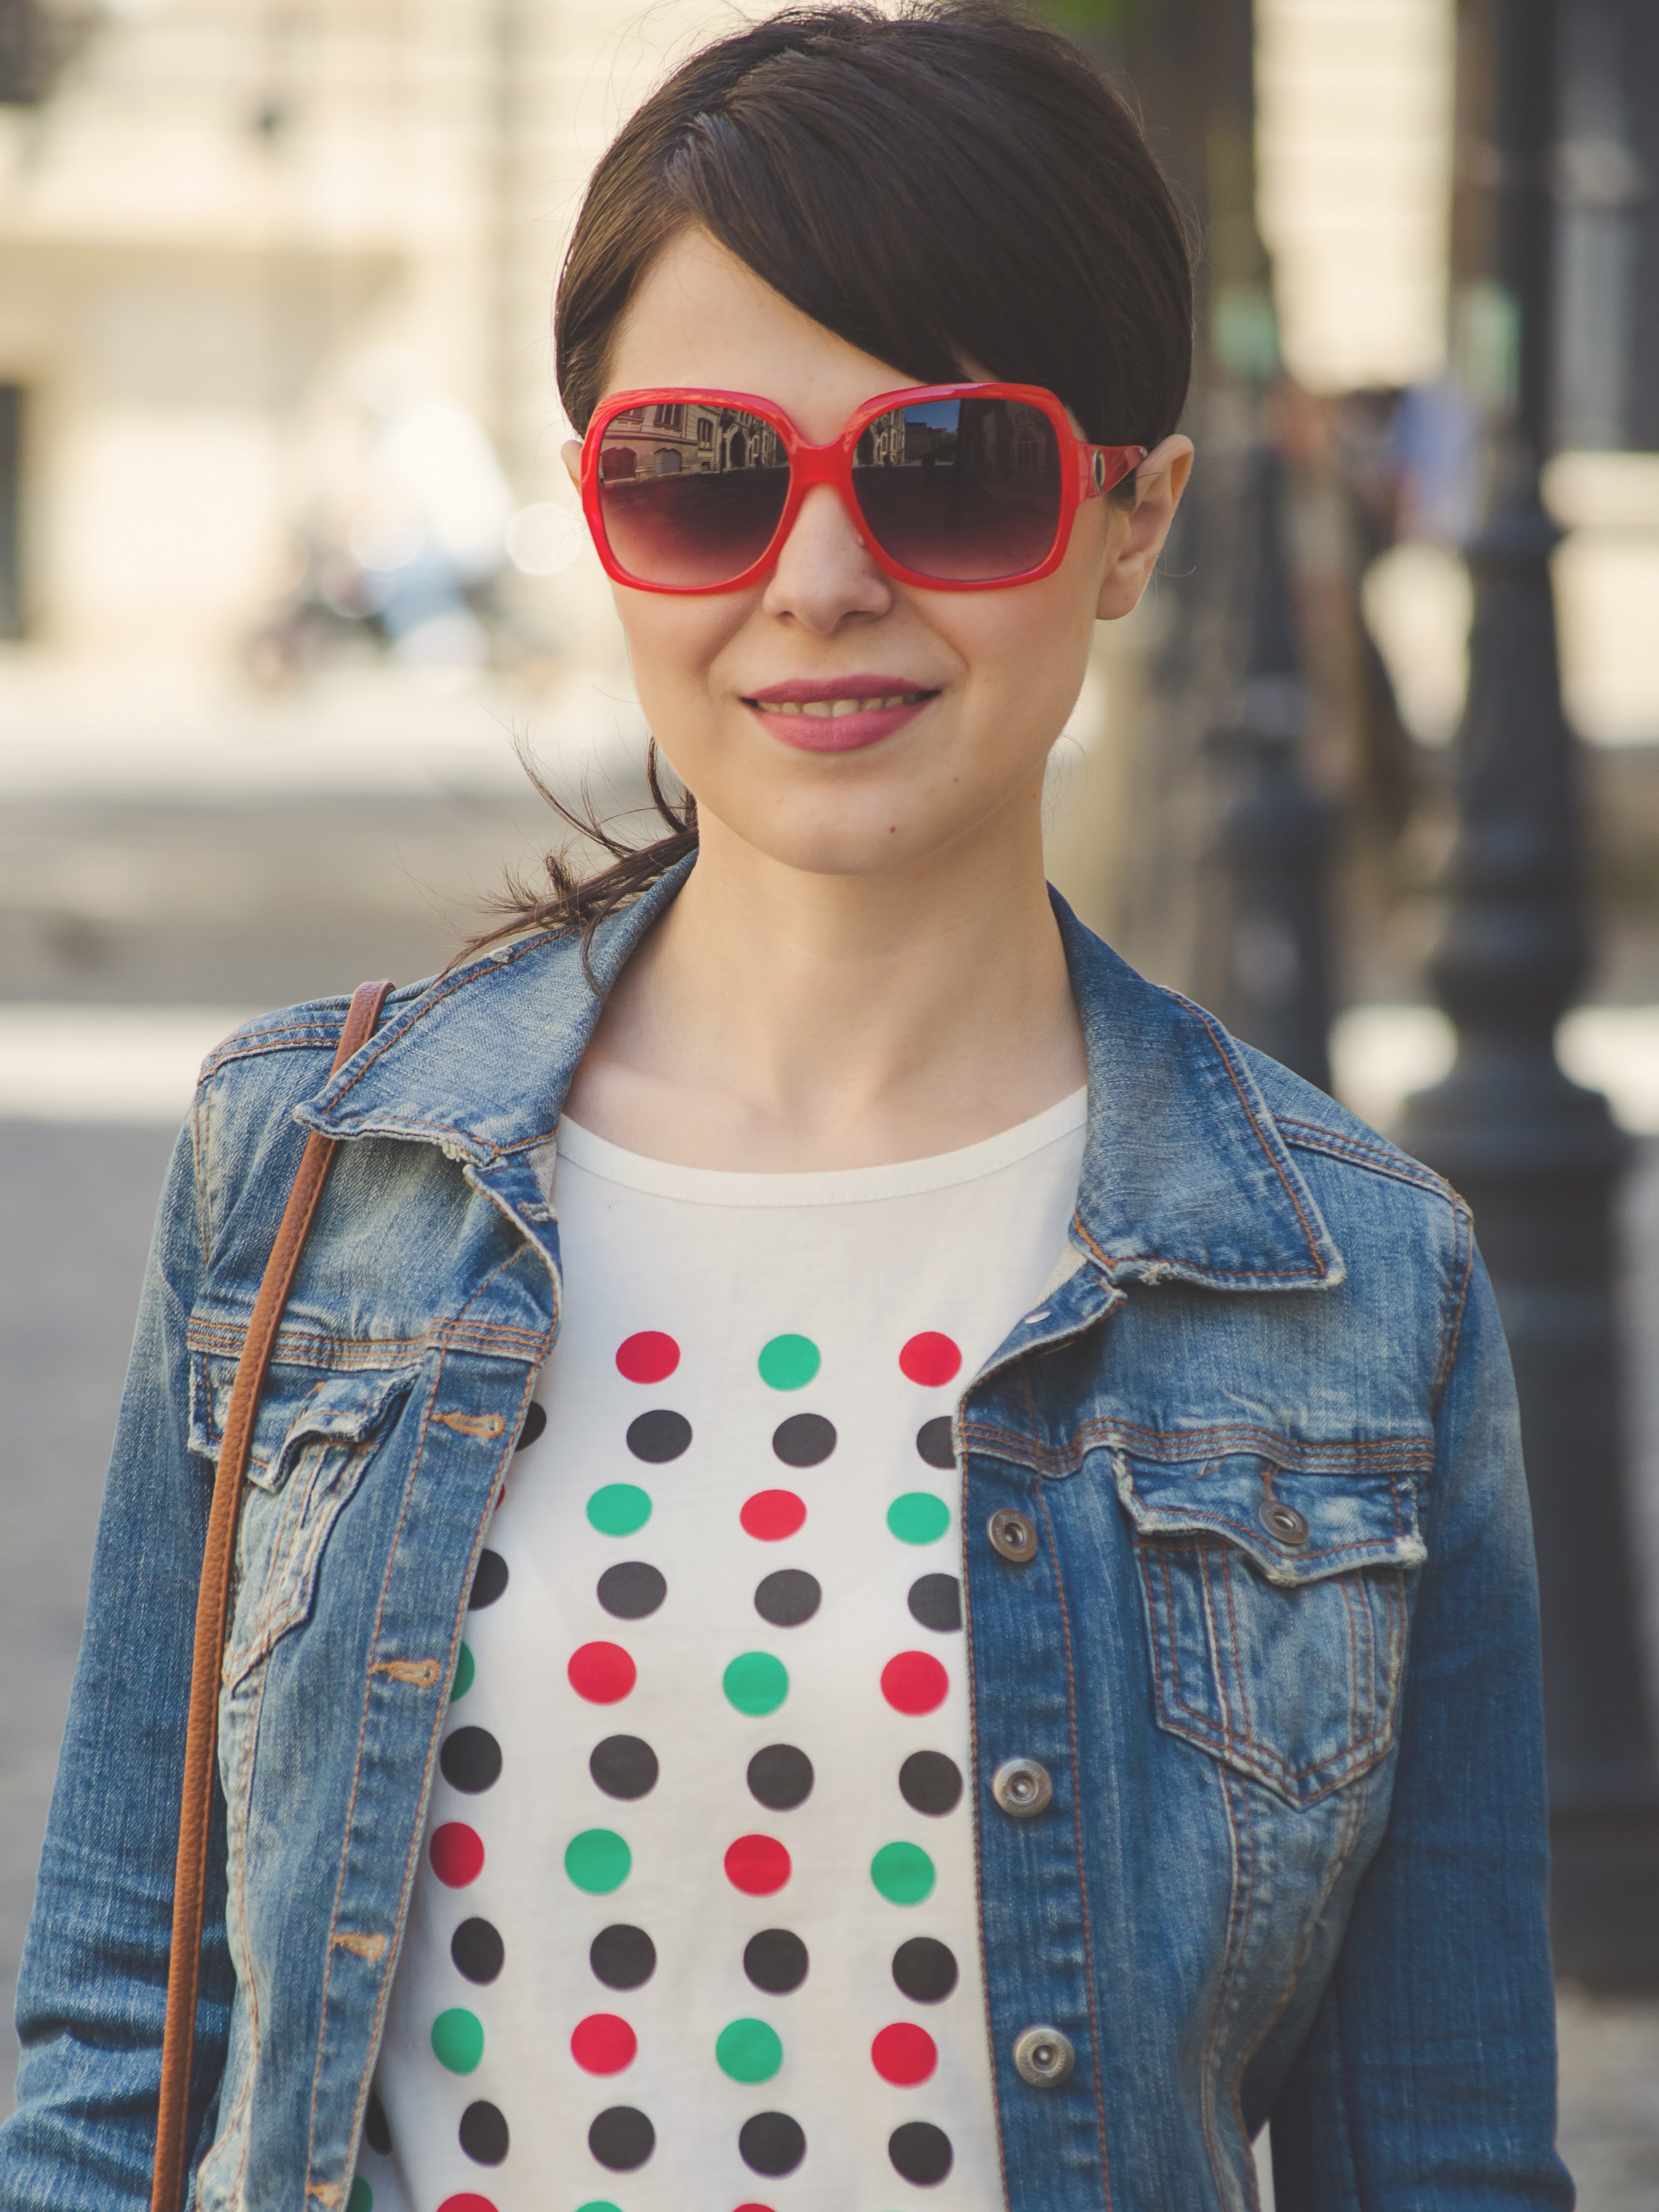 dotted t-shirt colourful dots ankle cut green pants converse sneakers jeans jacket Stradivarius brown h&m satchel bag red sunglasses 